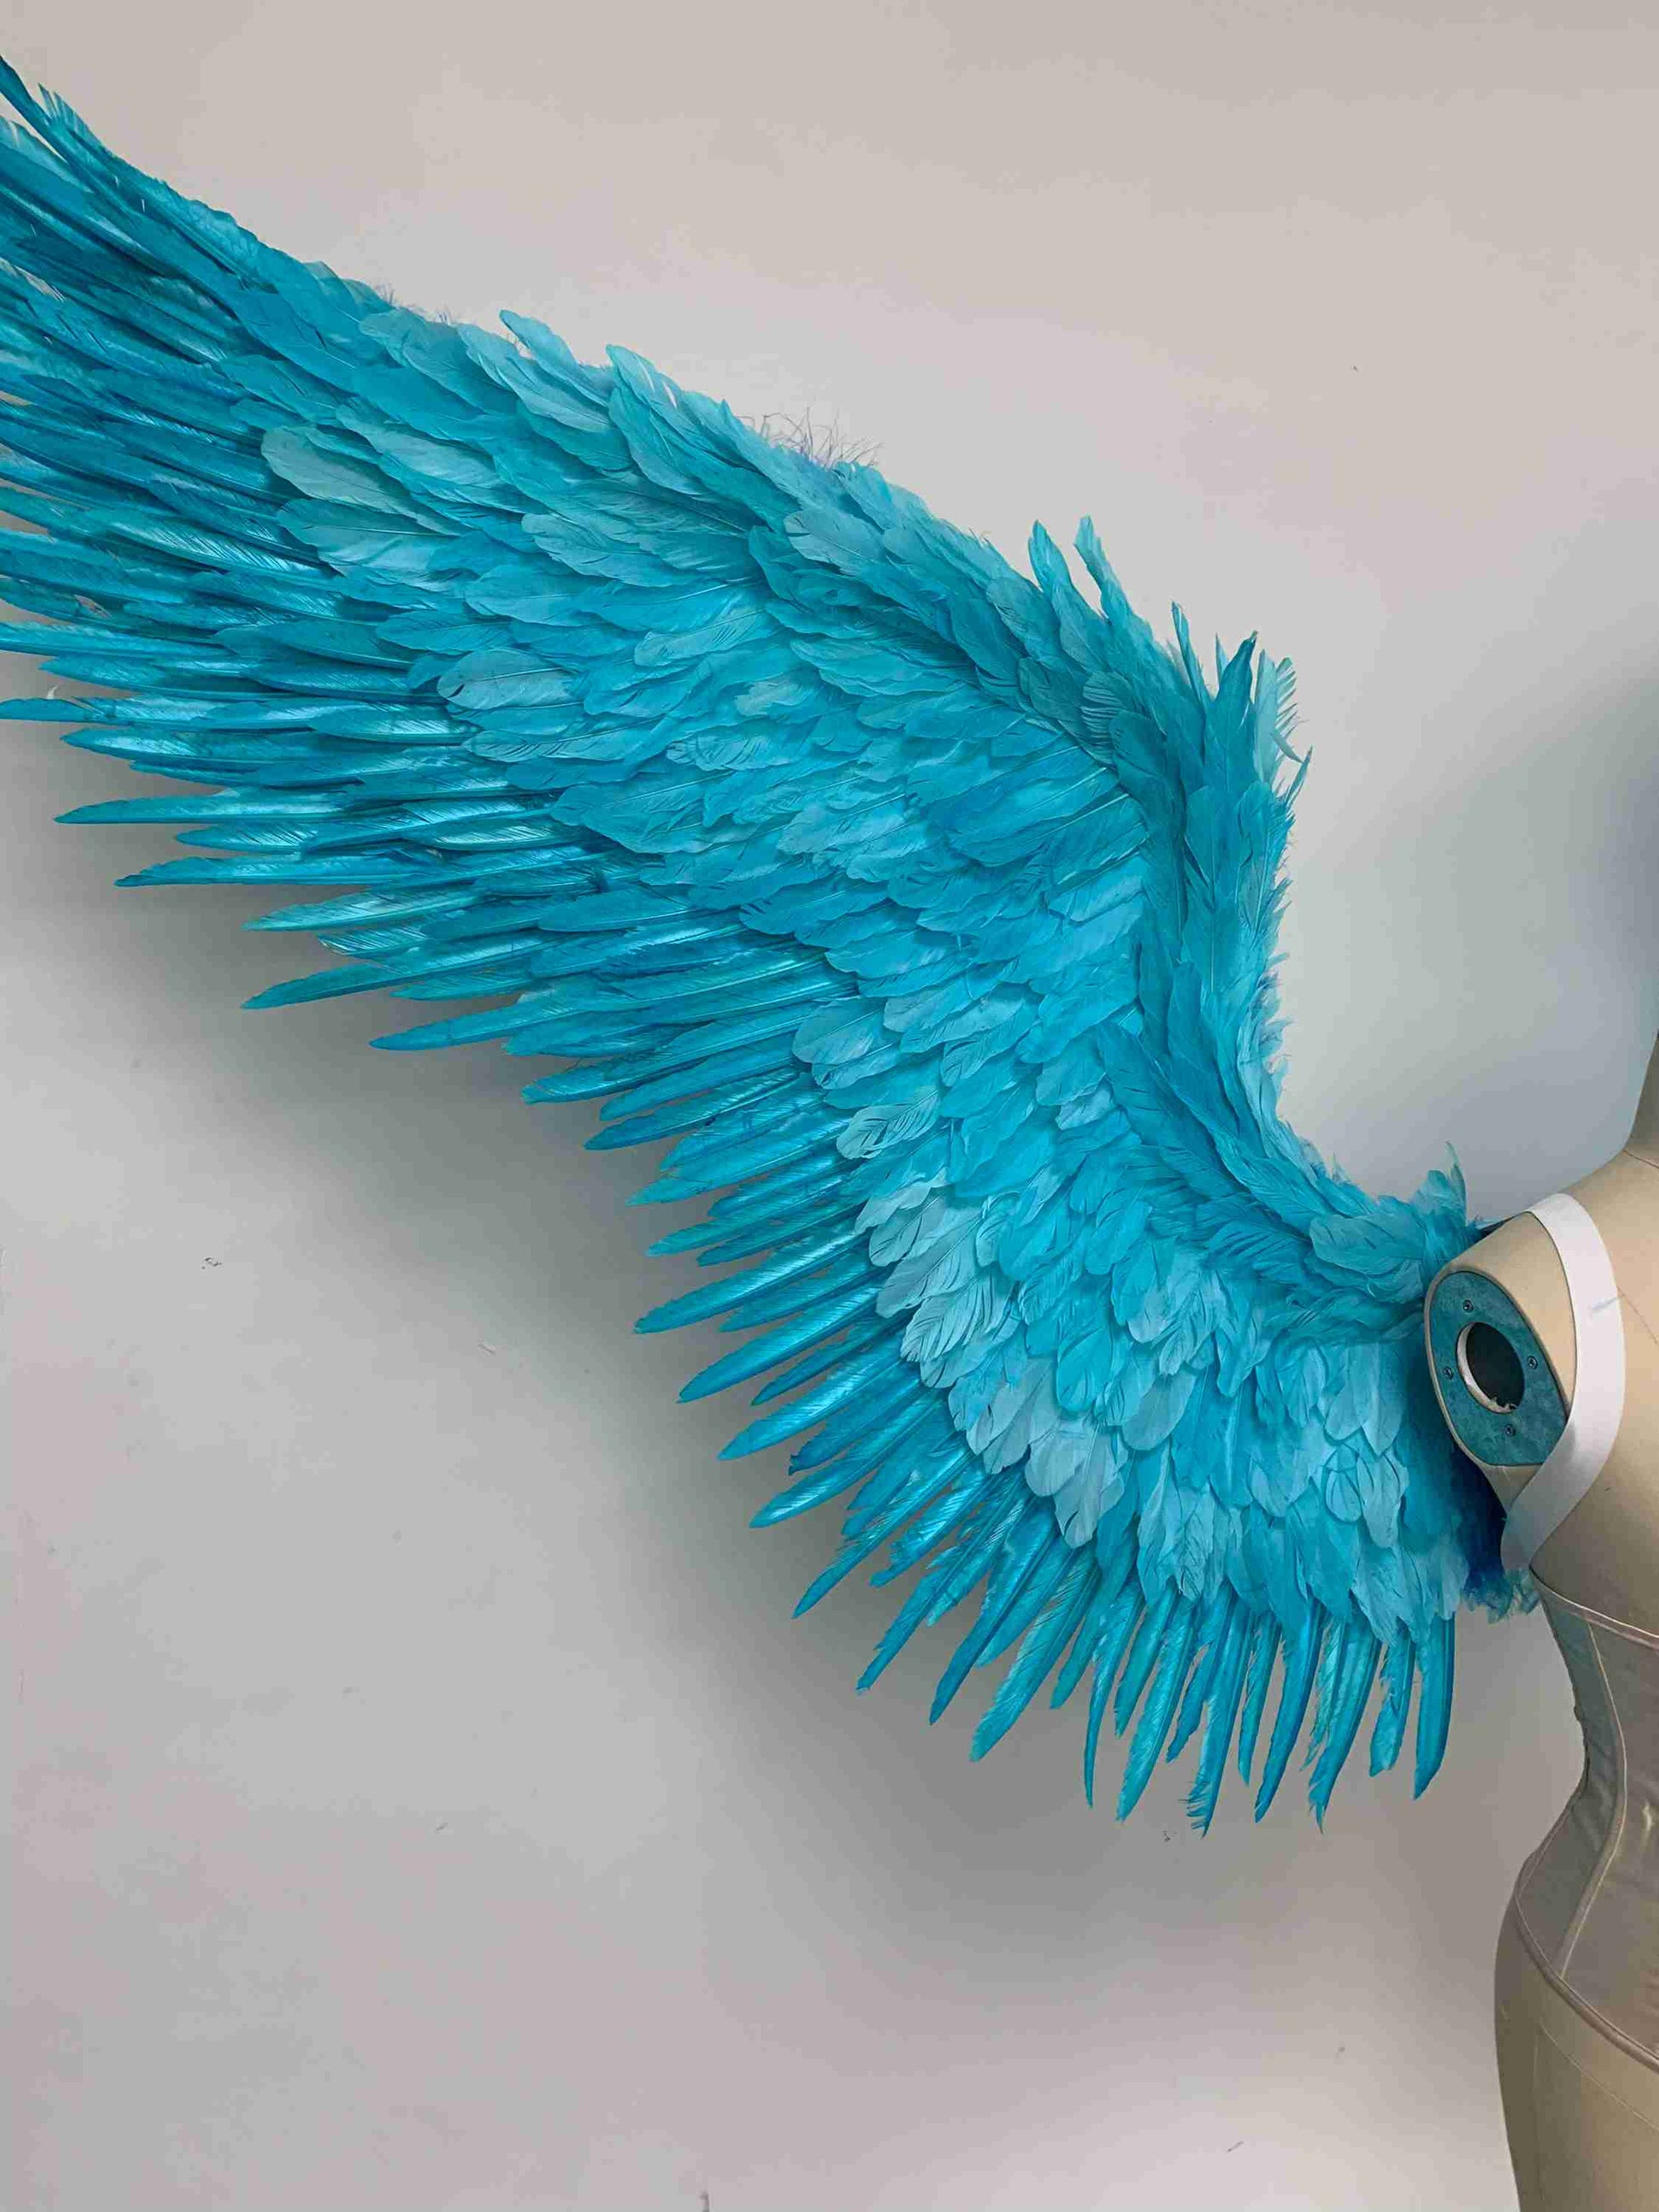 Our blue color angel wings from the close view. Made from goose feathers. Wings for angel costume or devil costume. Suitable for photoshoots.